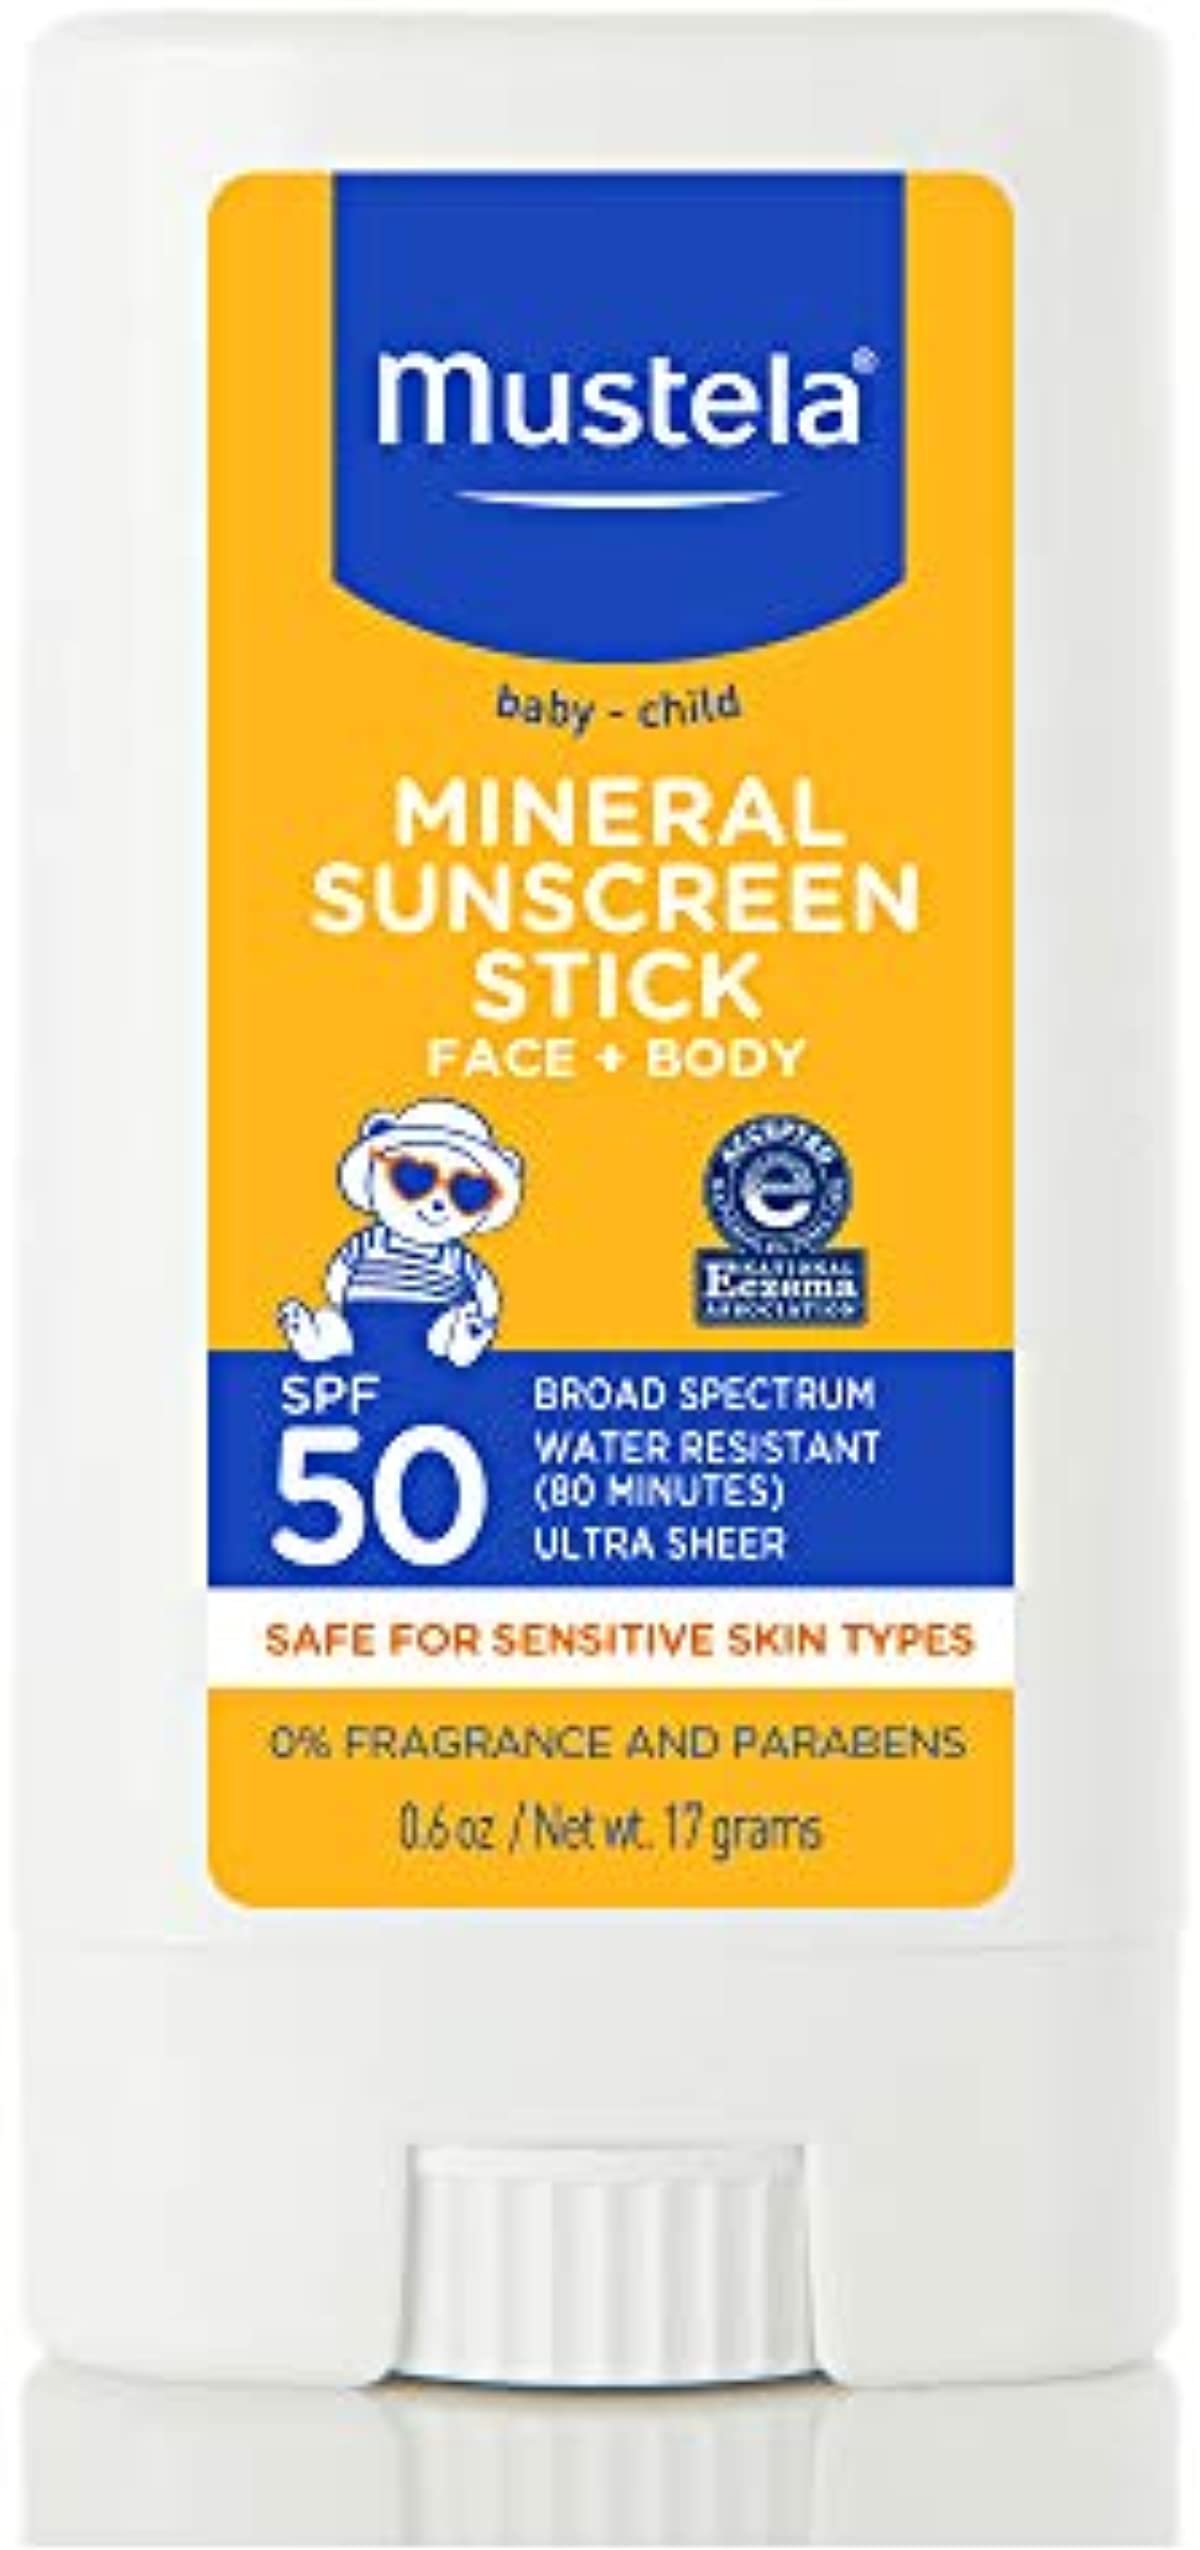 Mustela Baby Mineral Sunscreen Stick SPF 50 Broad Spectrum - Face & Body Sun Stick with 70{458416b358ed3958a53e571ebbbbfd1d9d69ea6ab7bbbd1251d702c3ca46680f} Organic Ingredients - Ultra Sheer, Water Resistant & Fragrance-Free - 0.6 oz.